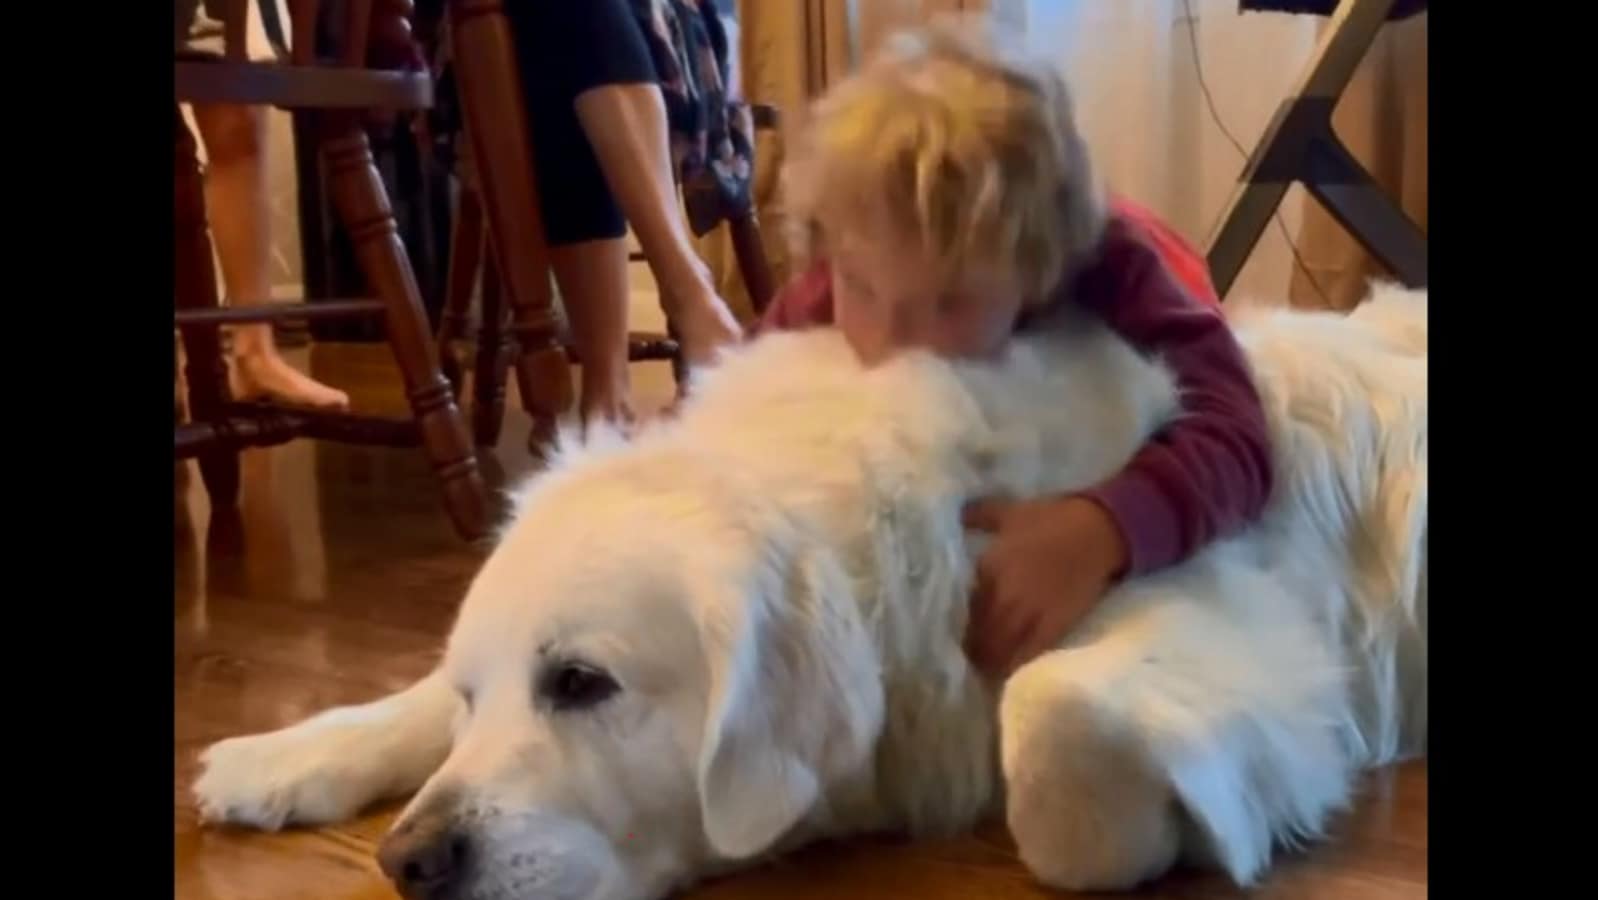 Golden Retriever sleeps patiently as kid pets and kisses it. Watch